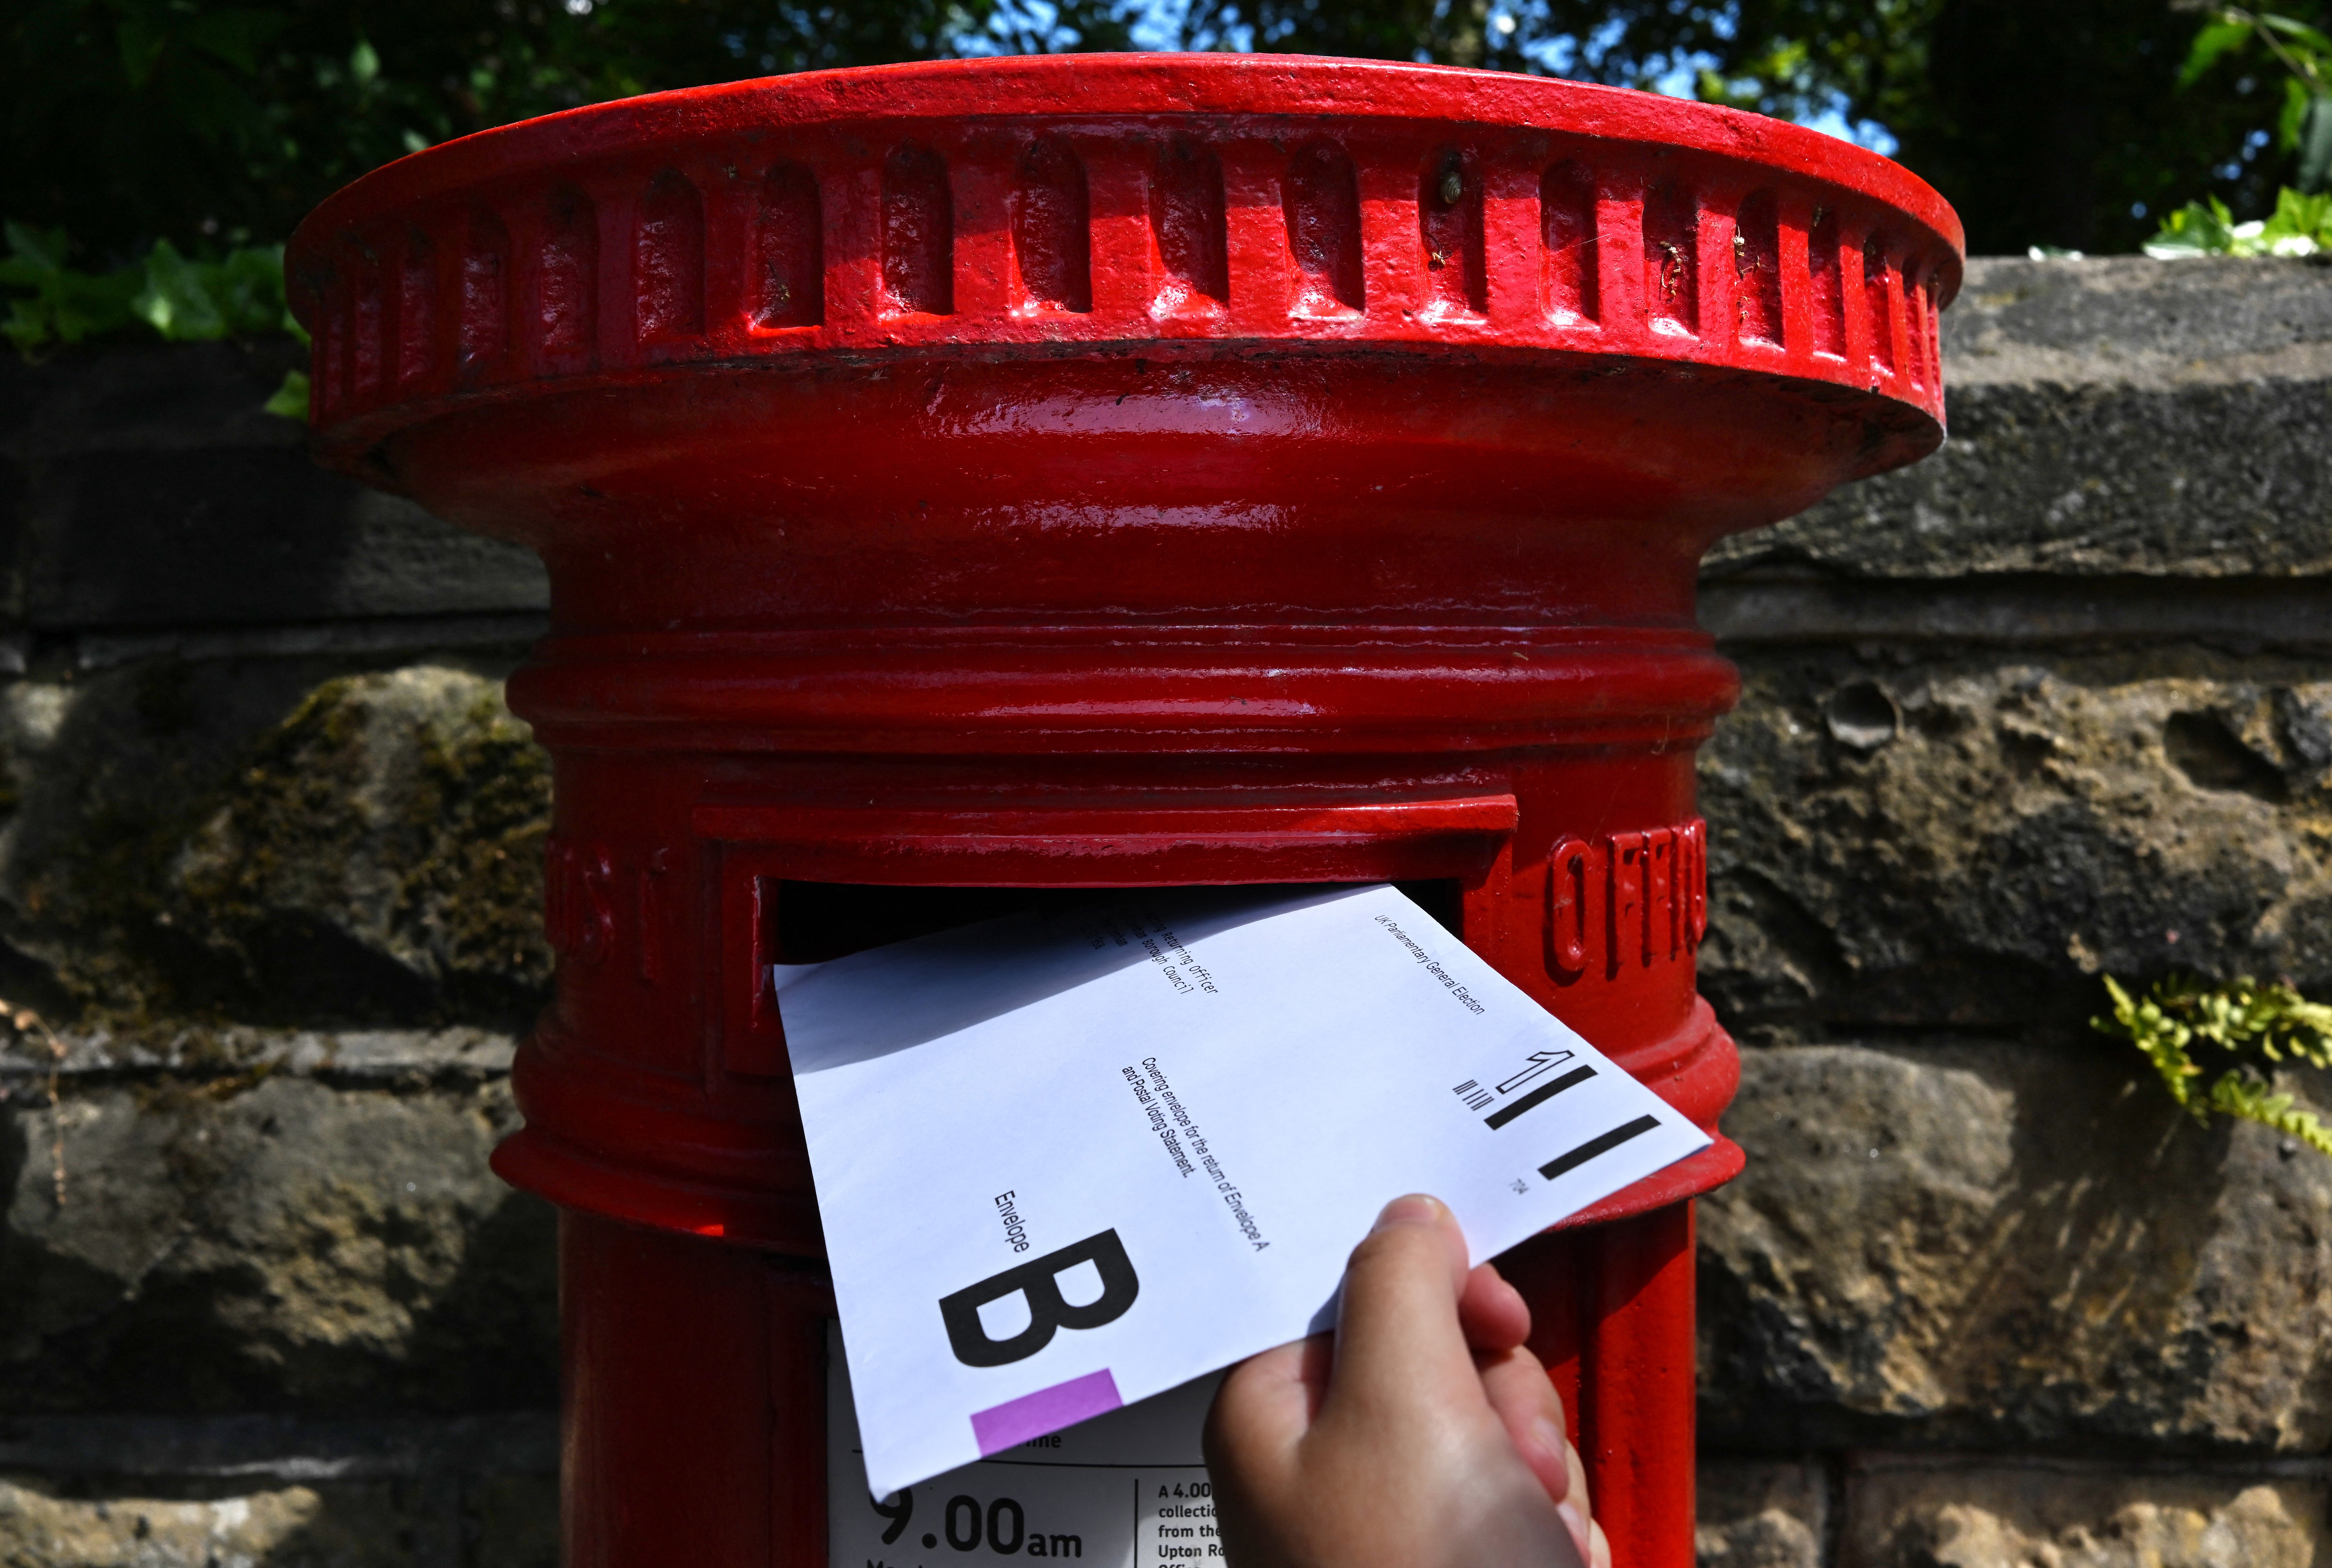 Constituencies from Kent to the Channel Islands have reported ‘missing’ postal votes